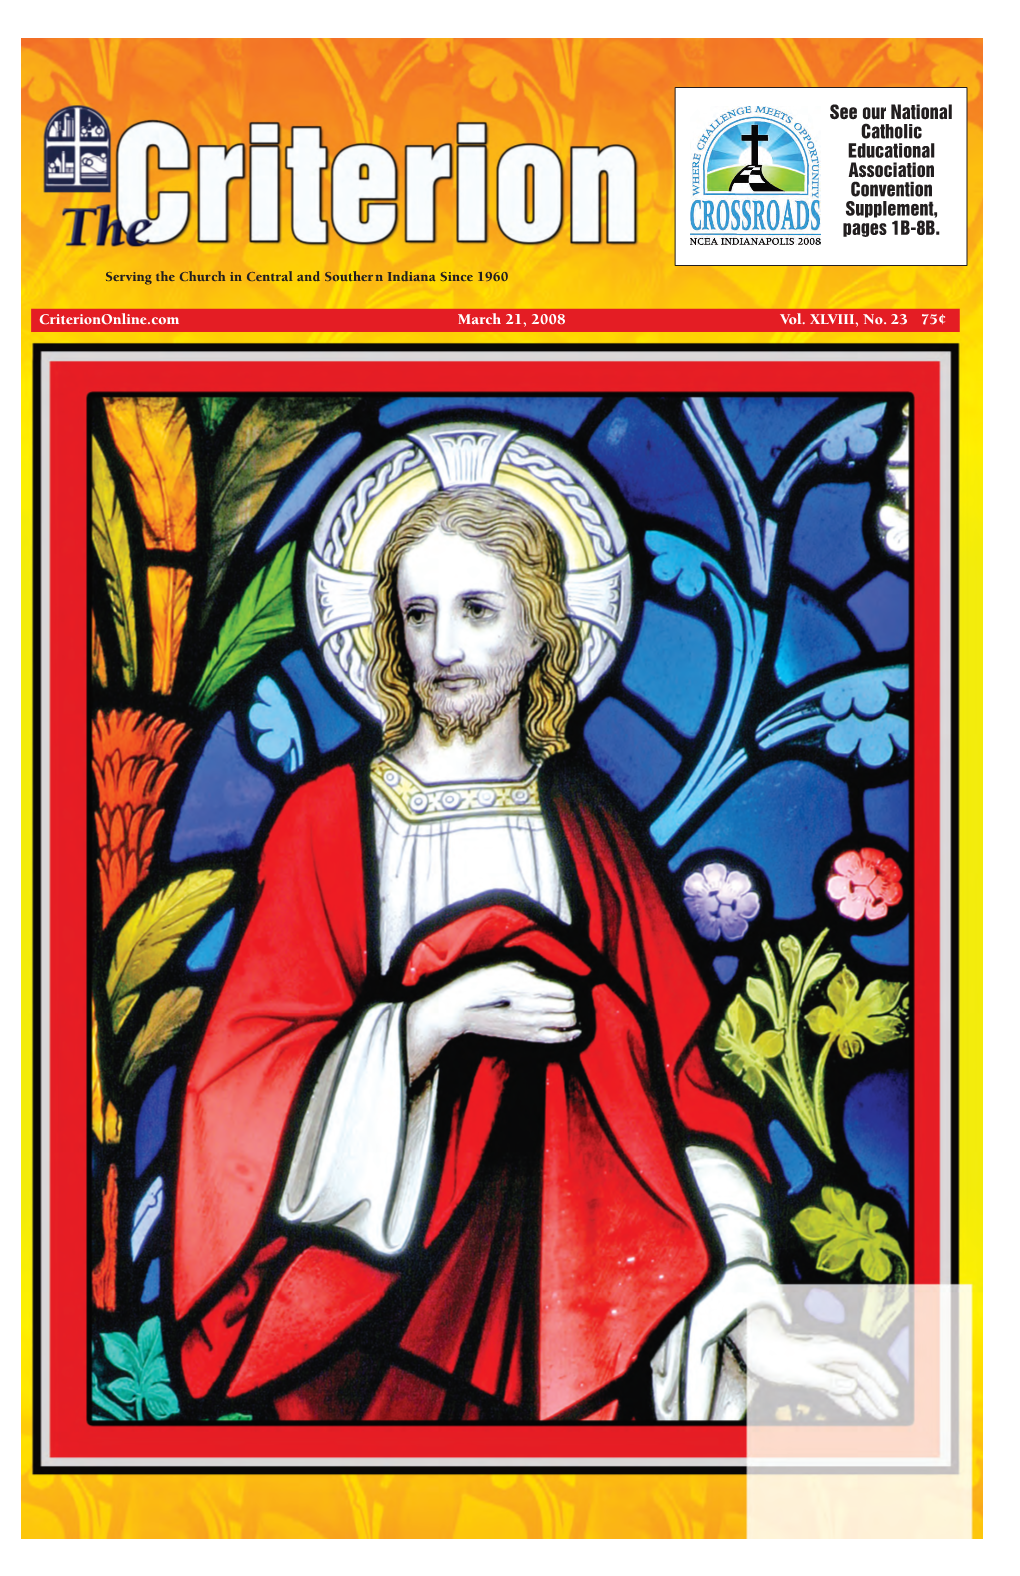 See Our National Catholic Educational Association Convention Supplement, Pages 1B-8B